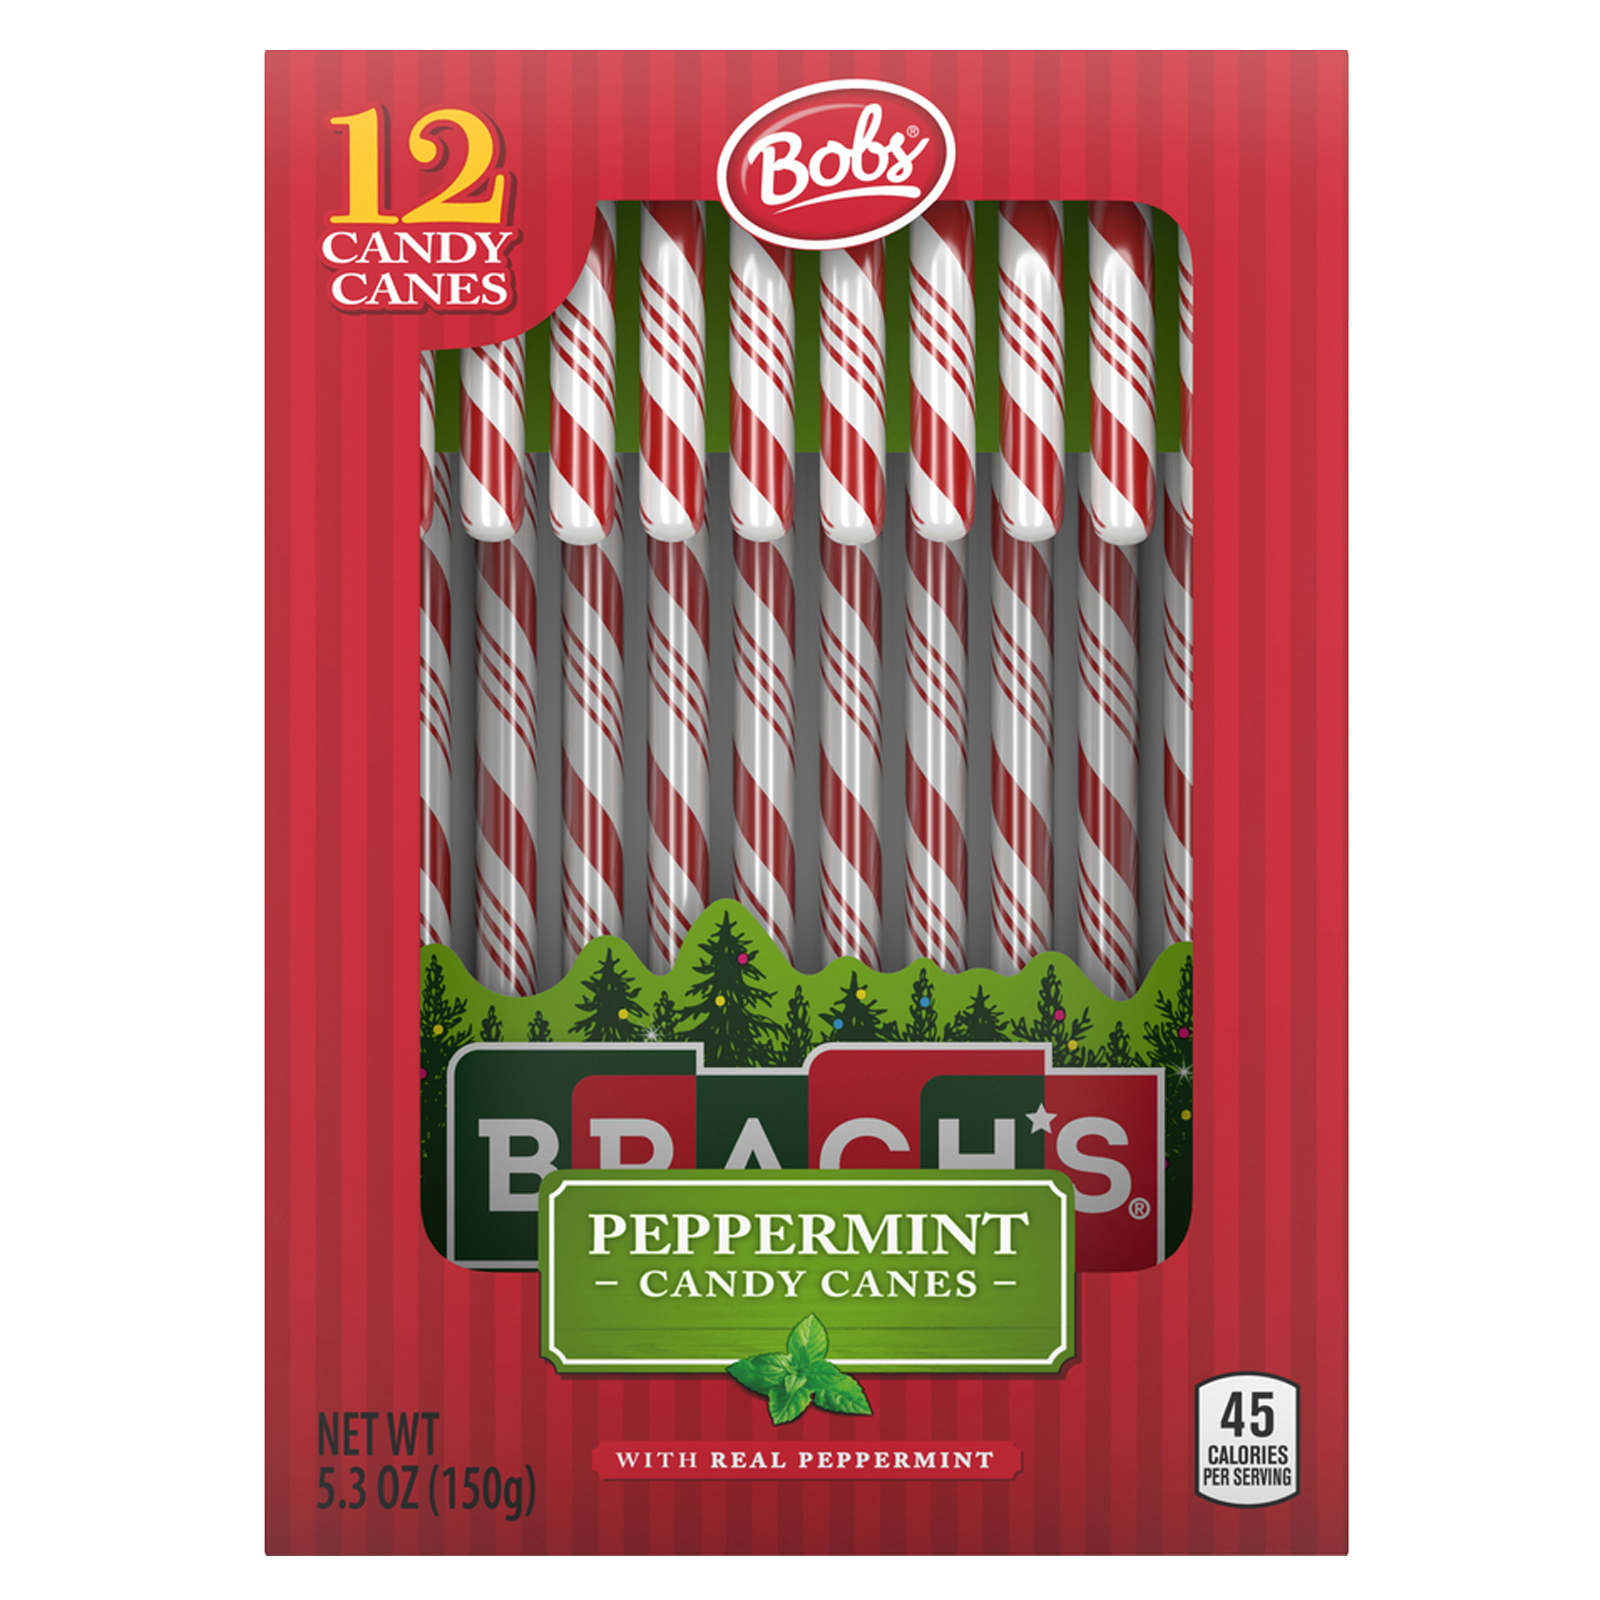 Brach's Bob's Red & White Mint Candy Canes 12ct